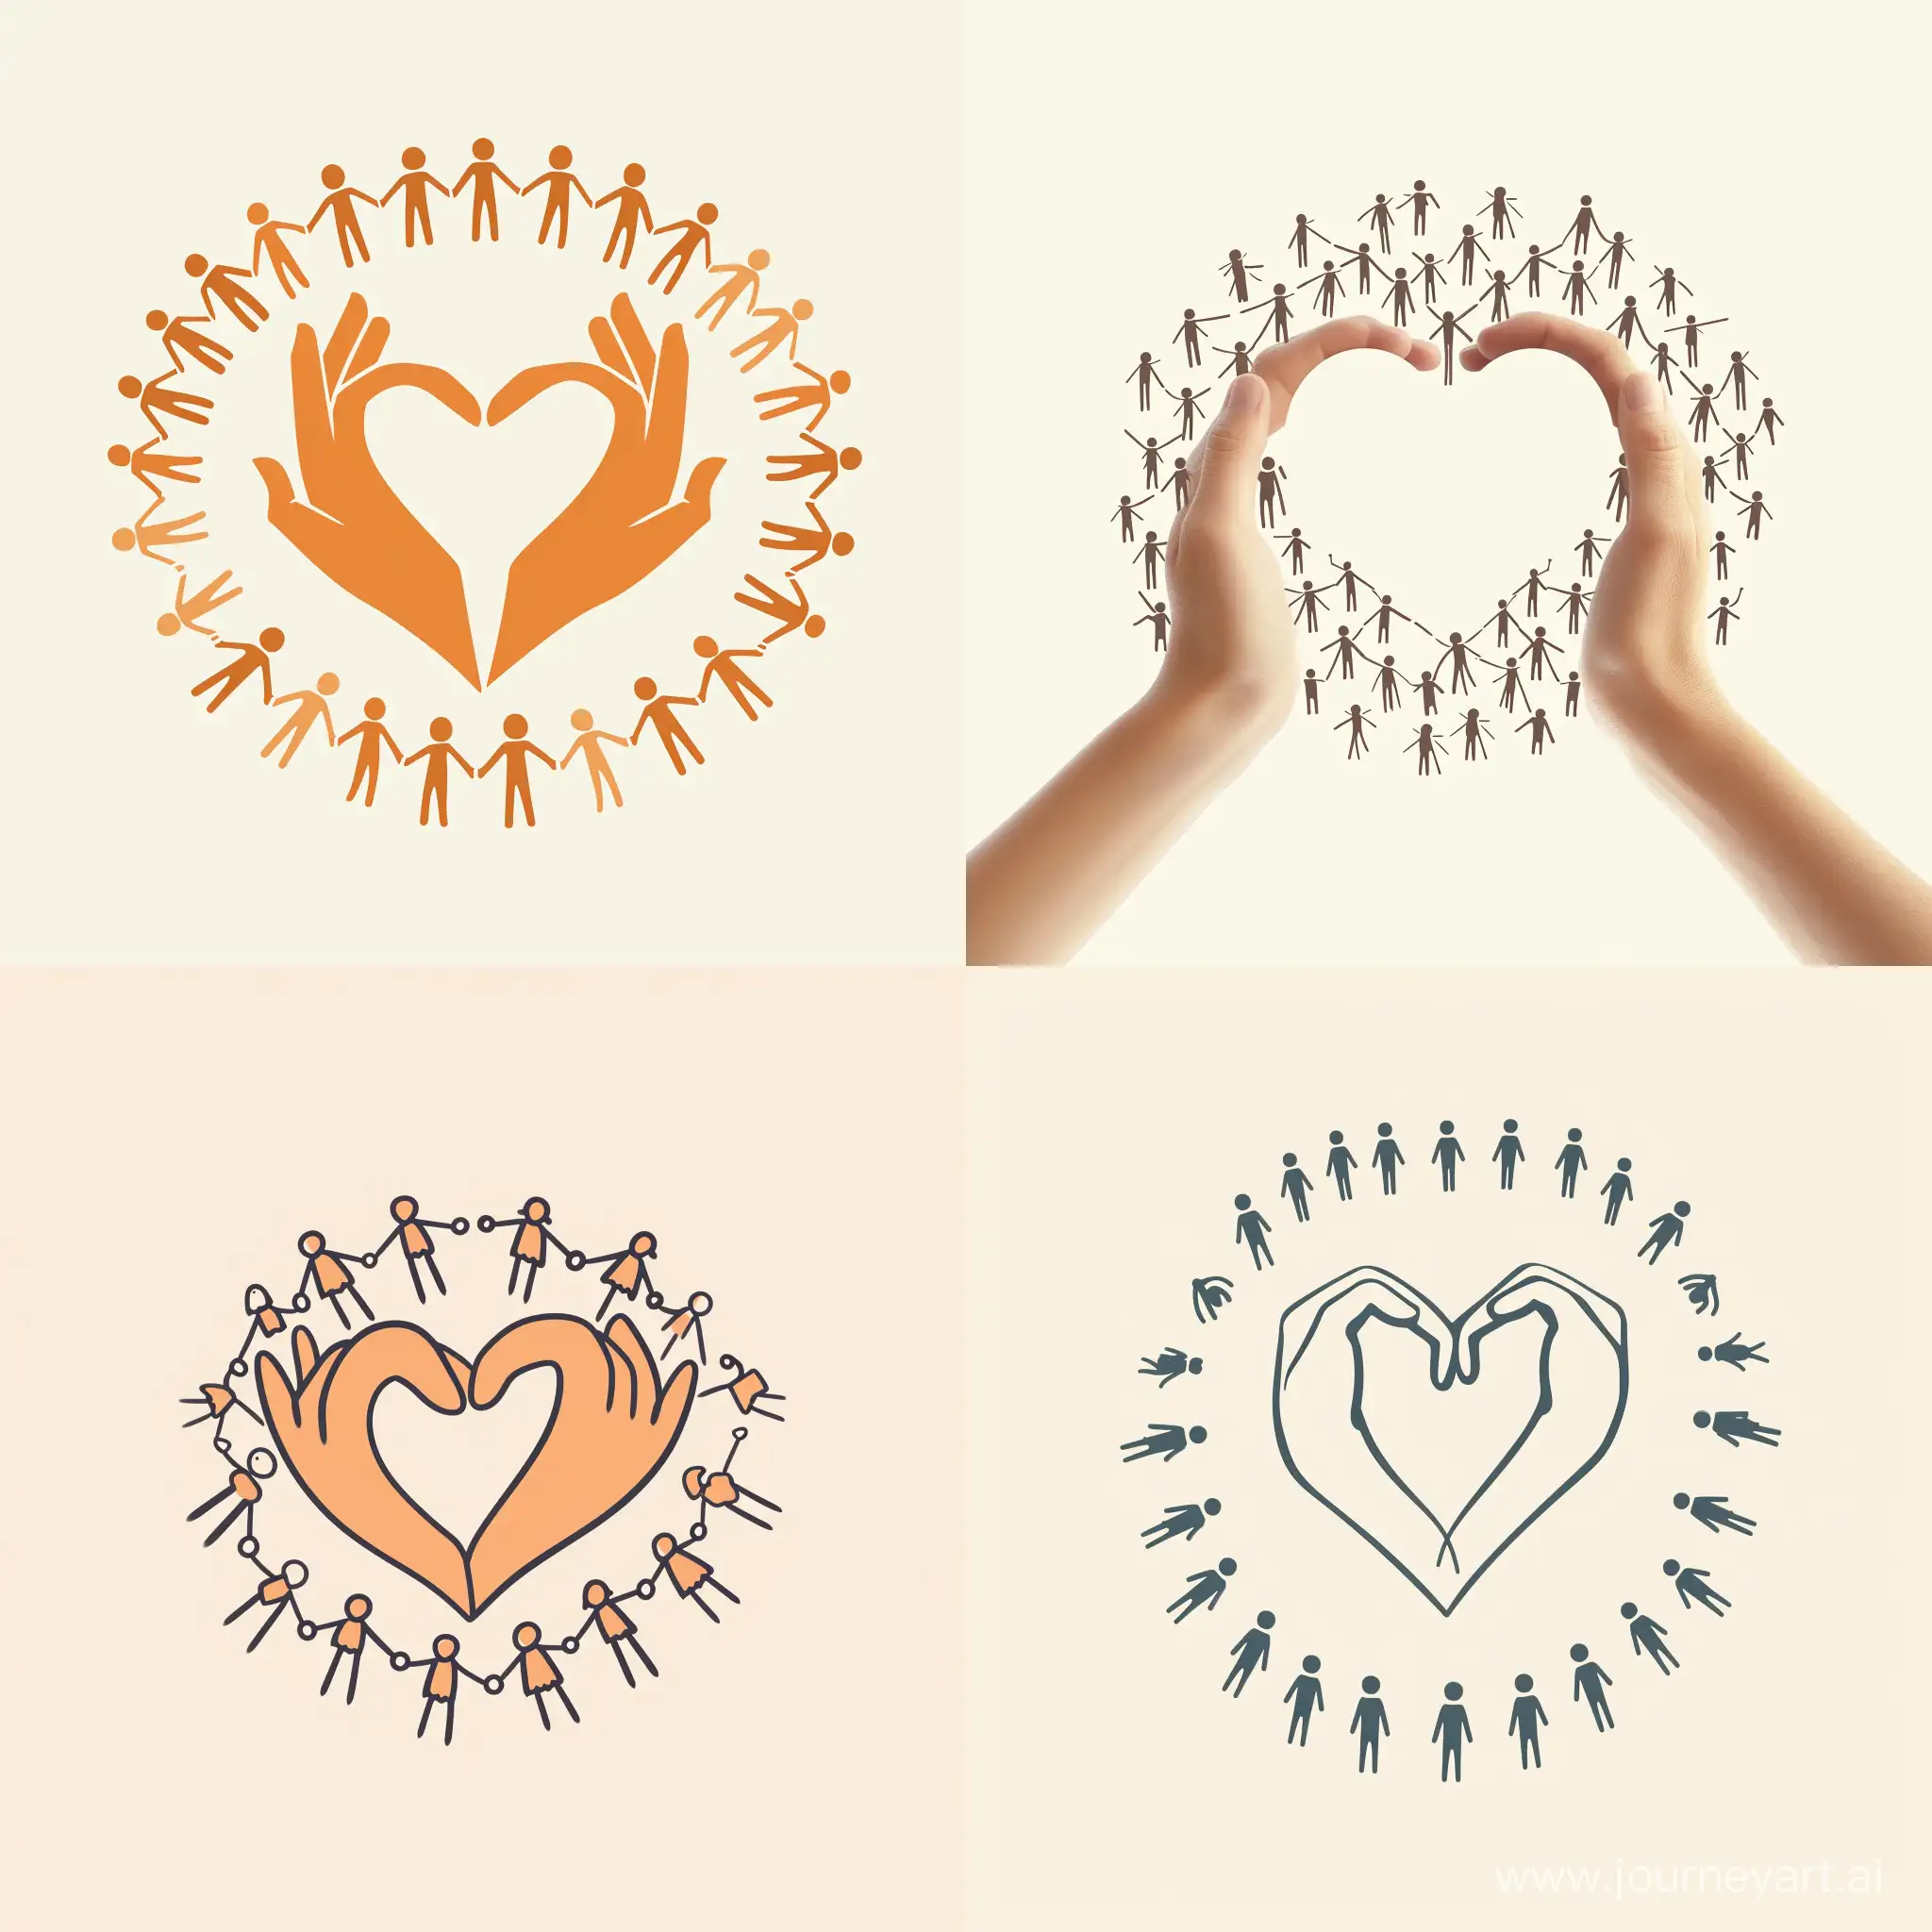 HeartShaped-Hands-Logo-with-Unified-Humanity